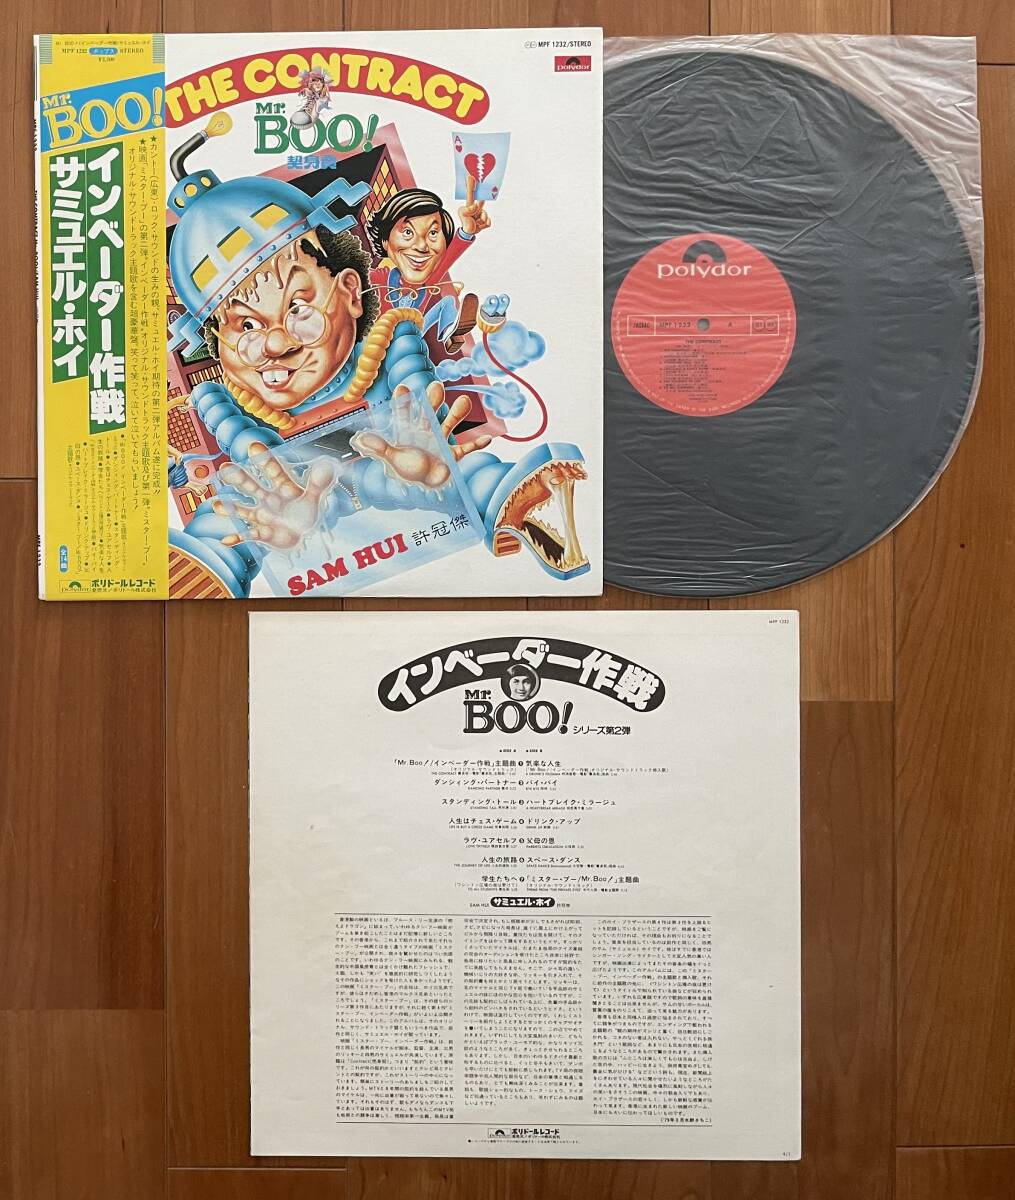 LP with belt Mr. BOO in beige da- military operation / Samuel * ho i/ THE CONTRACT SAM HUI MPF 1232